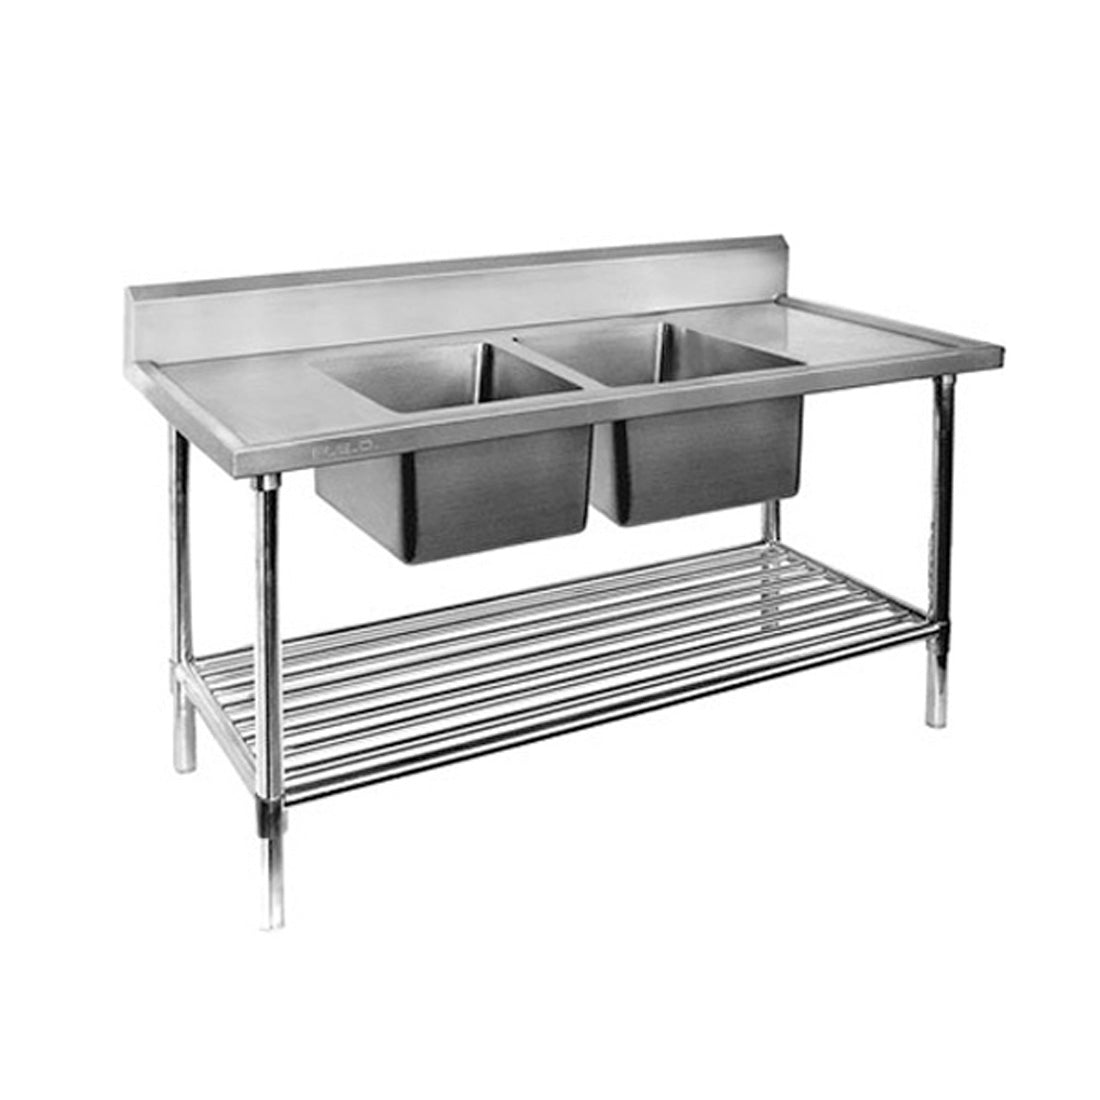 Modular Systems Double Centre Sink Bench with Pot Undershelf 2400x700x900 DSB7-2400C/A